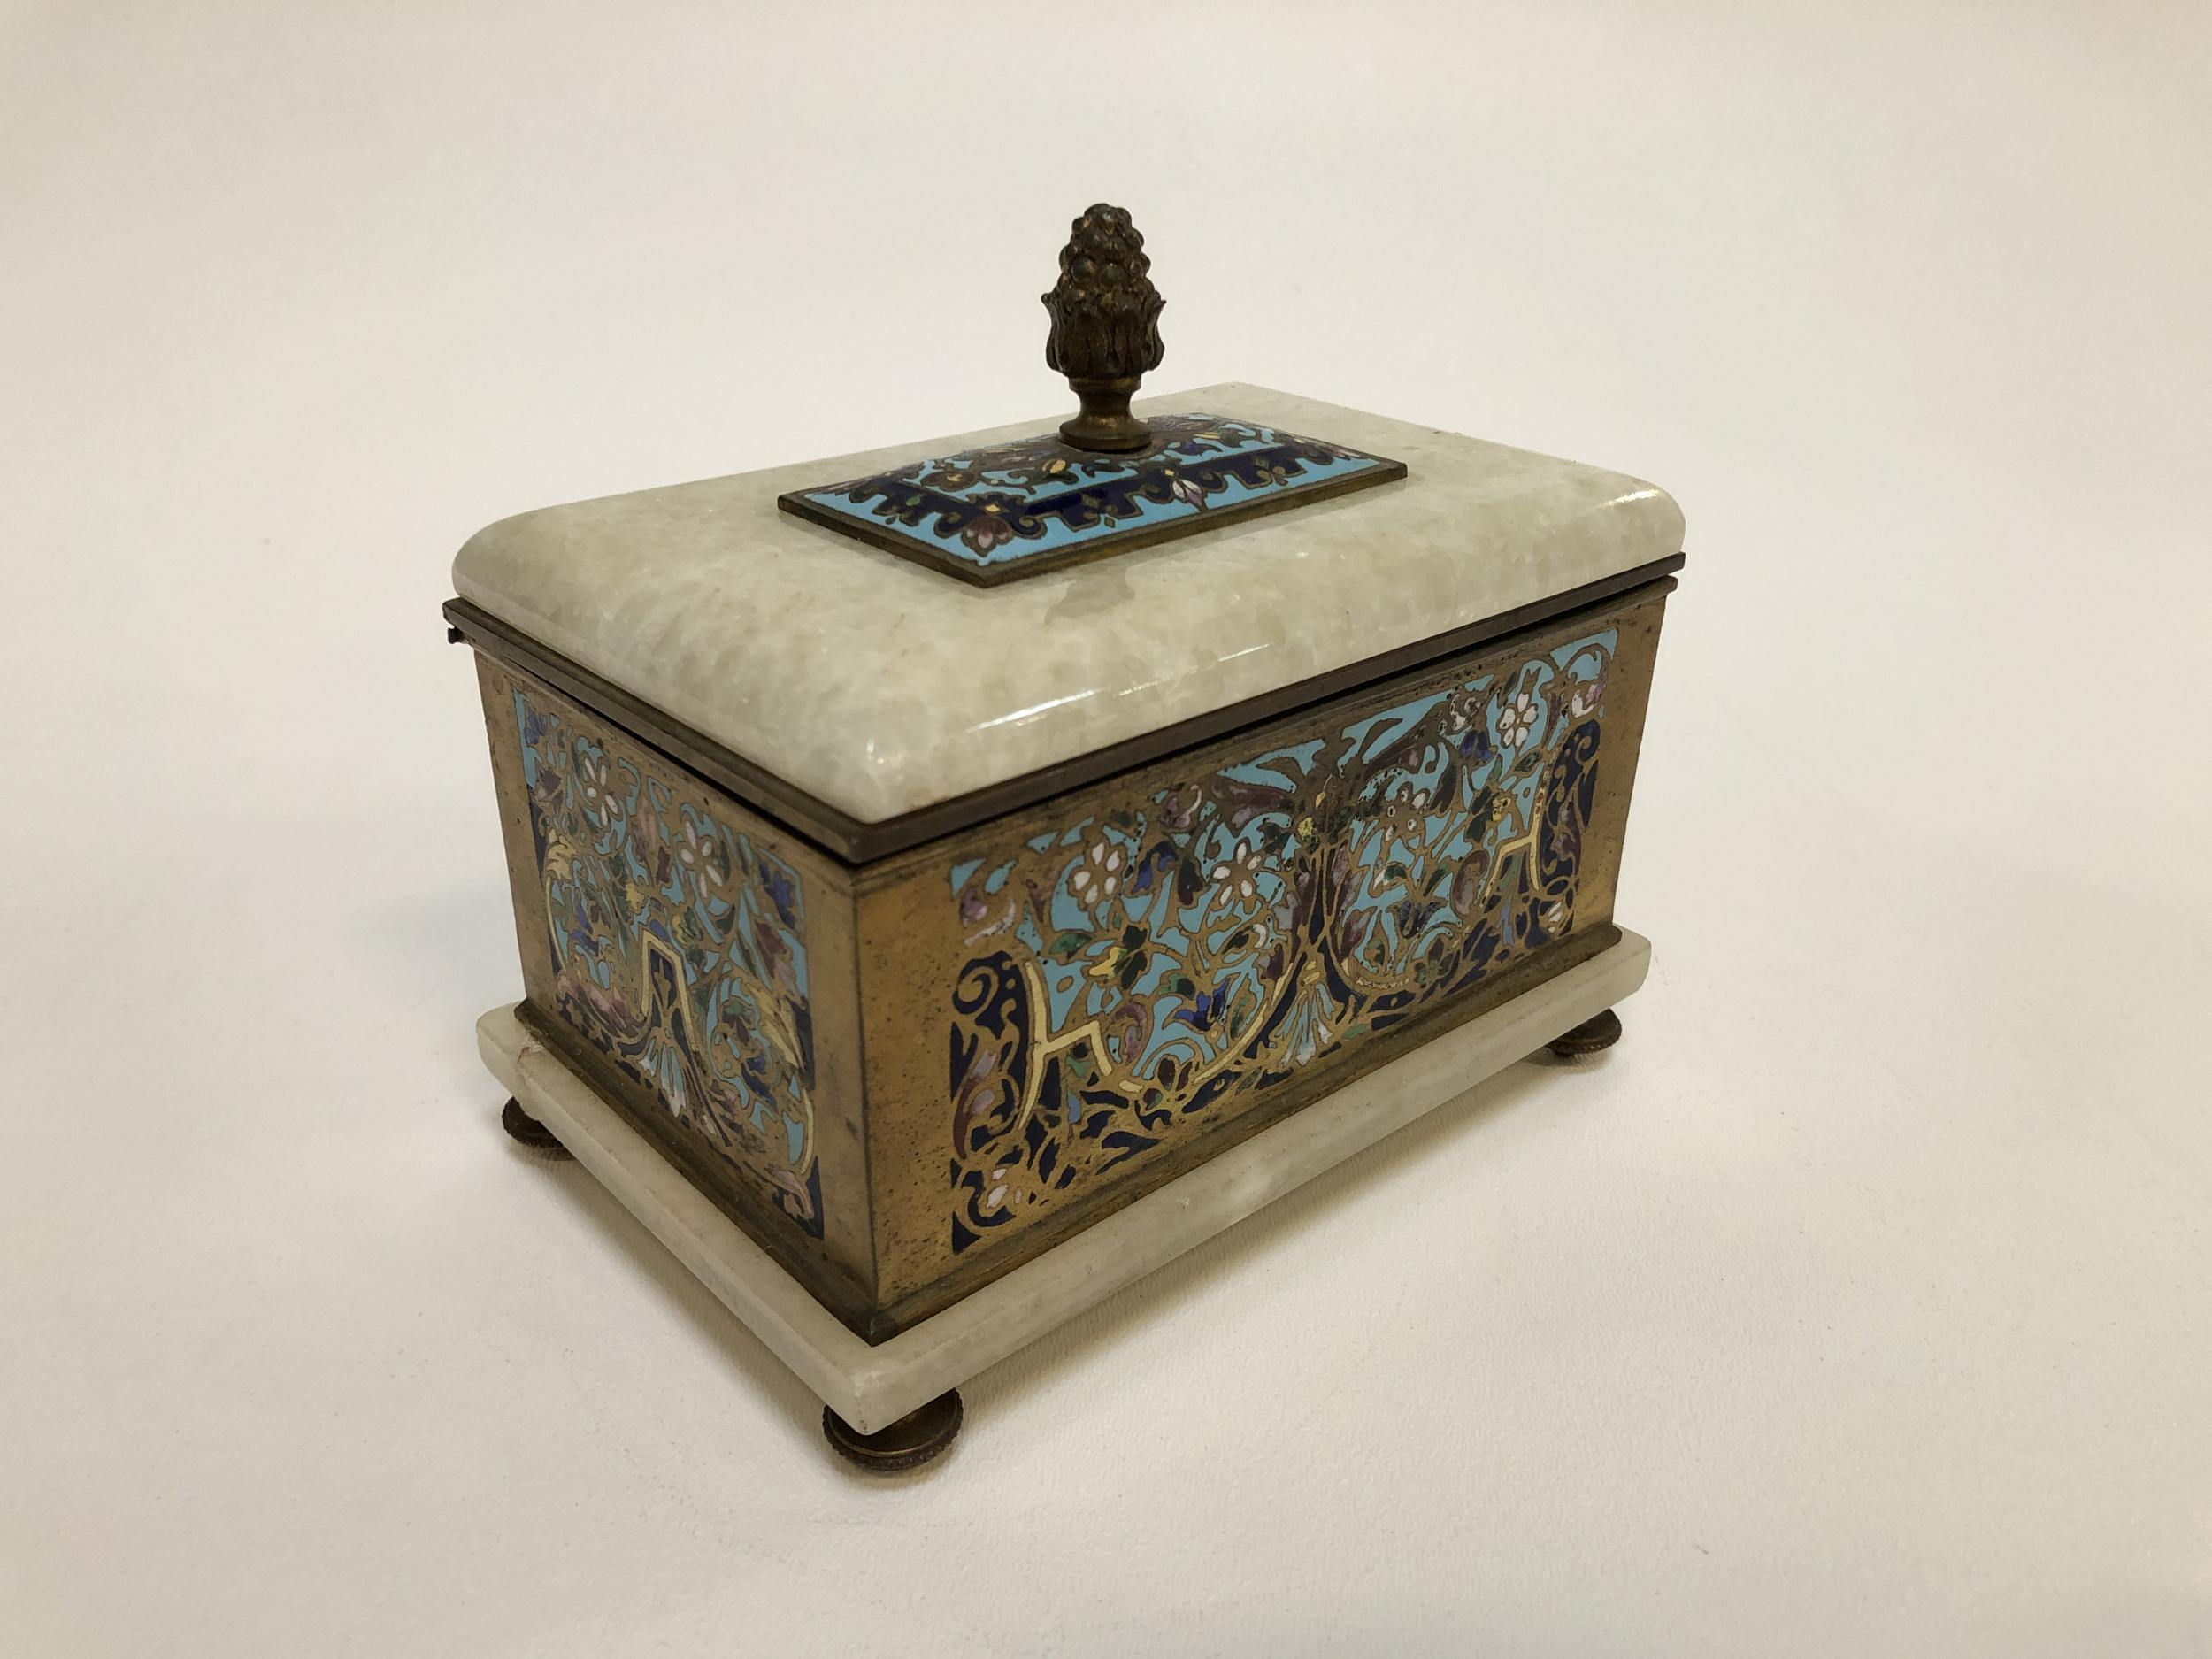 This is a beautiful ornately designed bronze cloisonné box that features an alabaster lid and base. This base allows light to enter from the bottom when the box is open, which is a lovely feature. The presence of alabaster also makes this piece